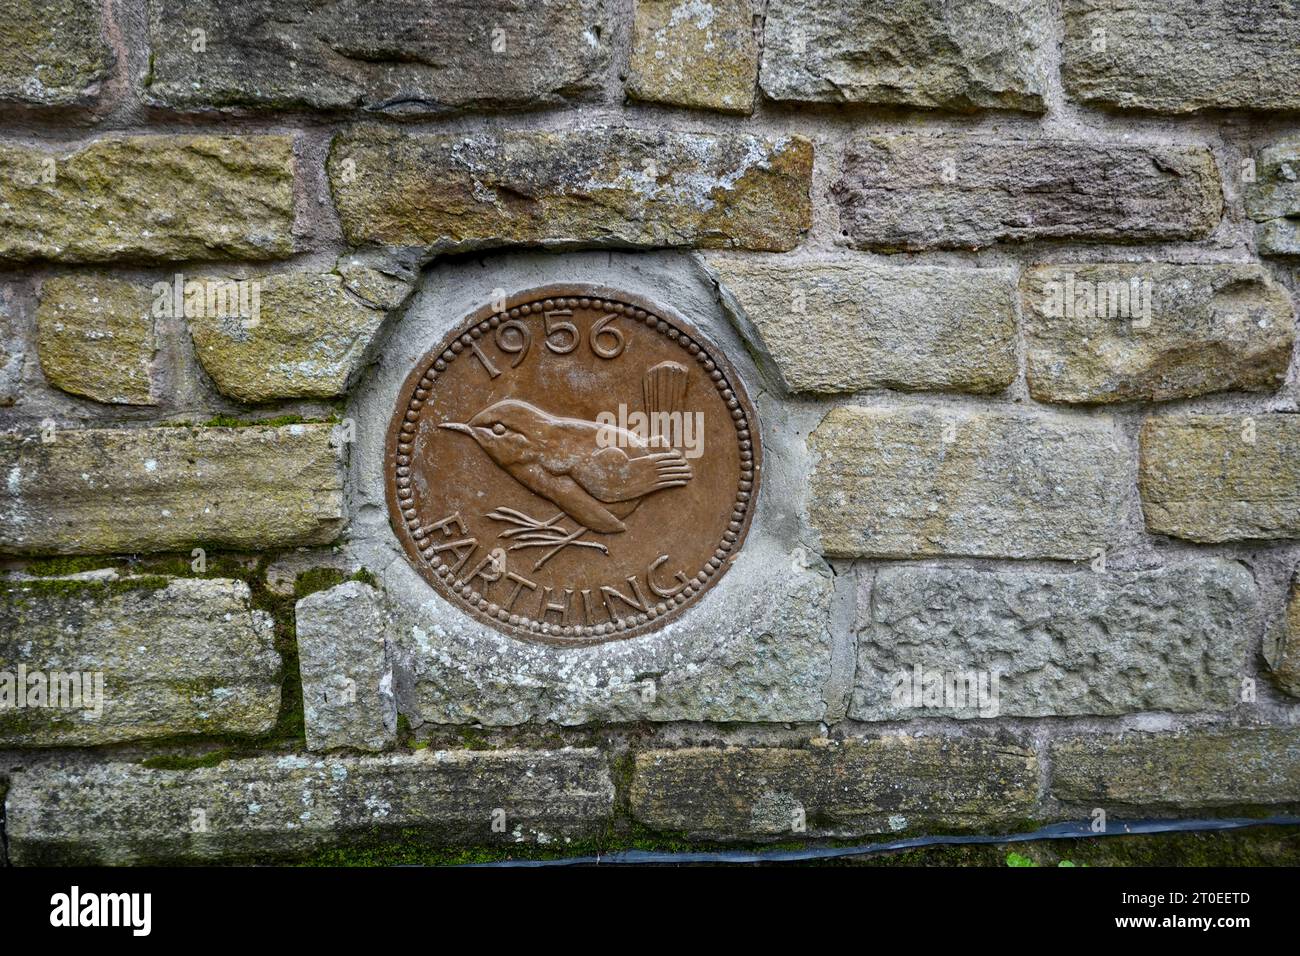 A large farthing built into a wall in New Mills, Derbyshire Stock Photo